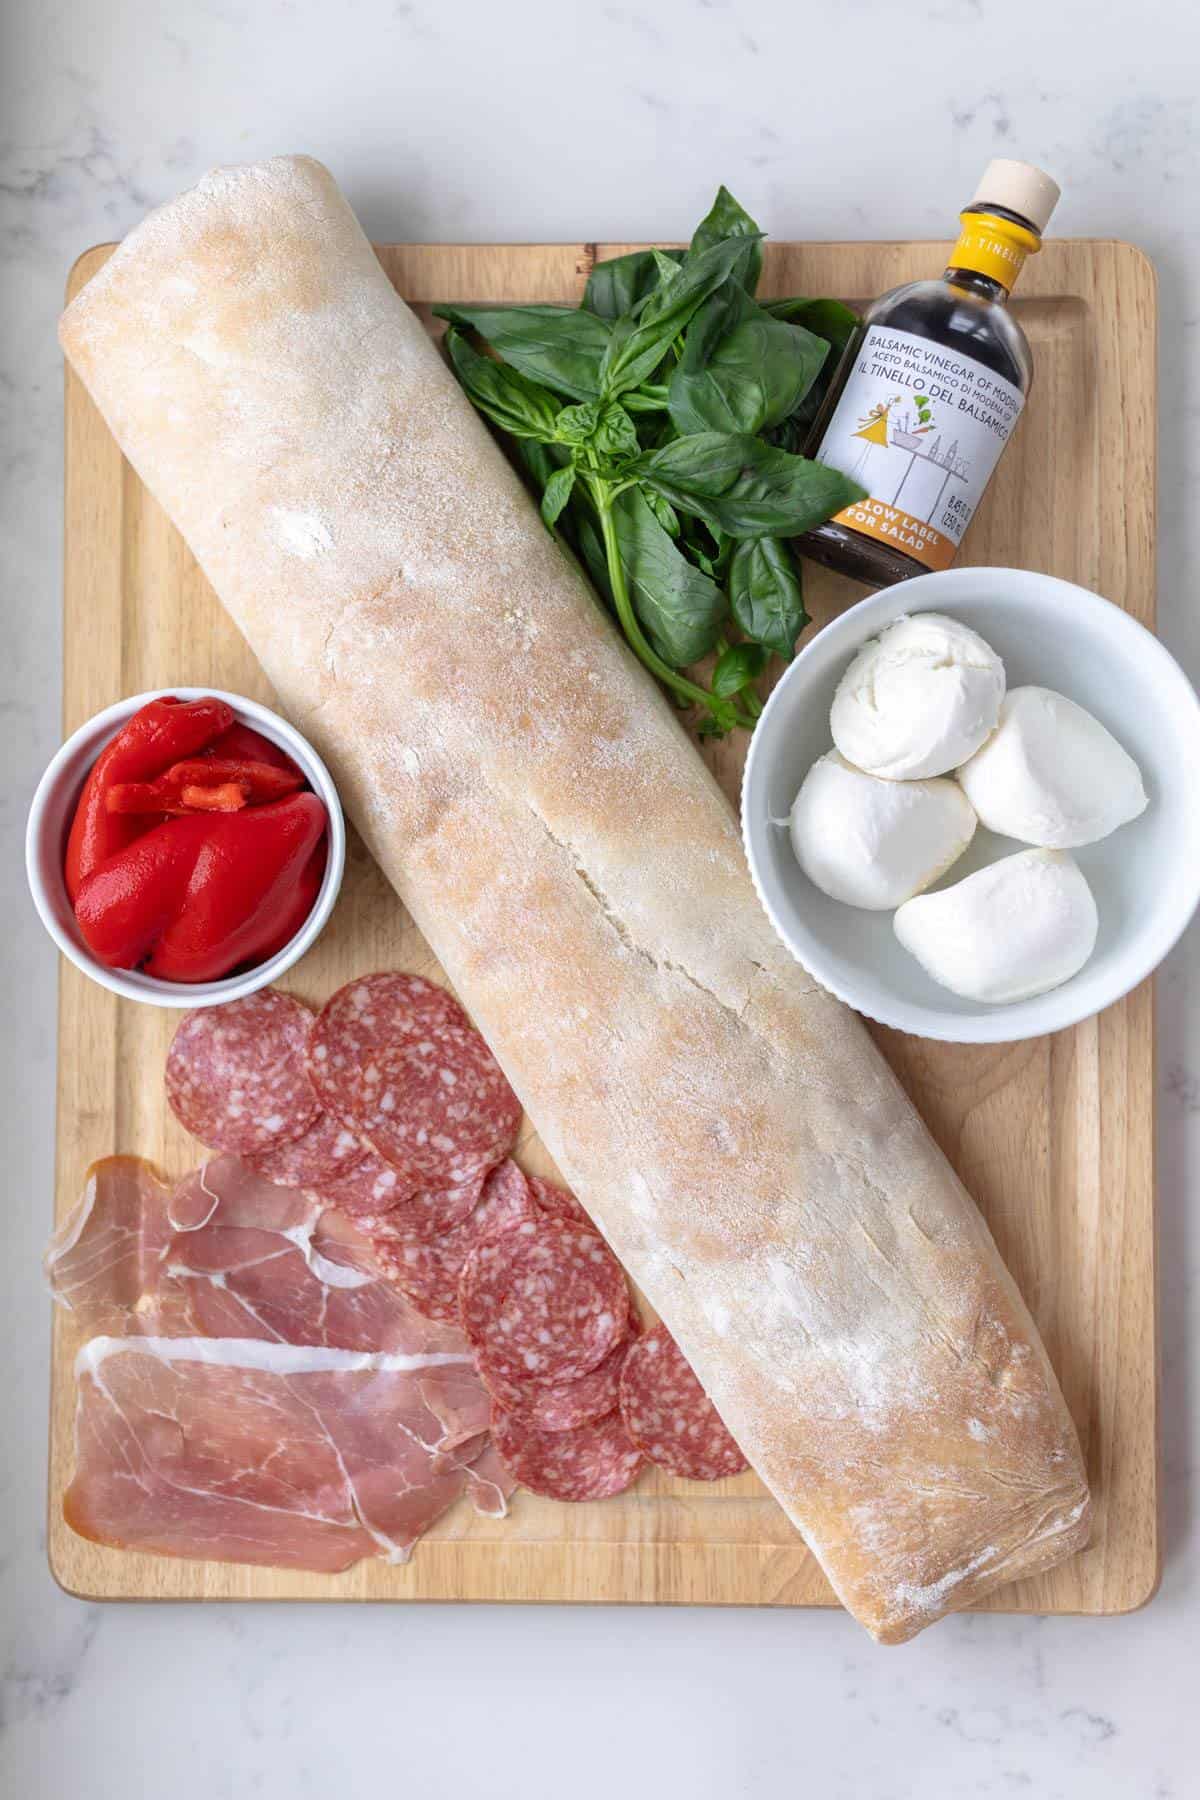 baguette, basil, peppers, balsamic, mozzarella, salami, and prosciutto on a wooden board on a marble counter